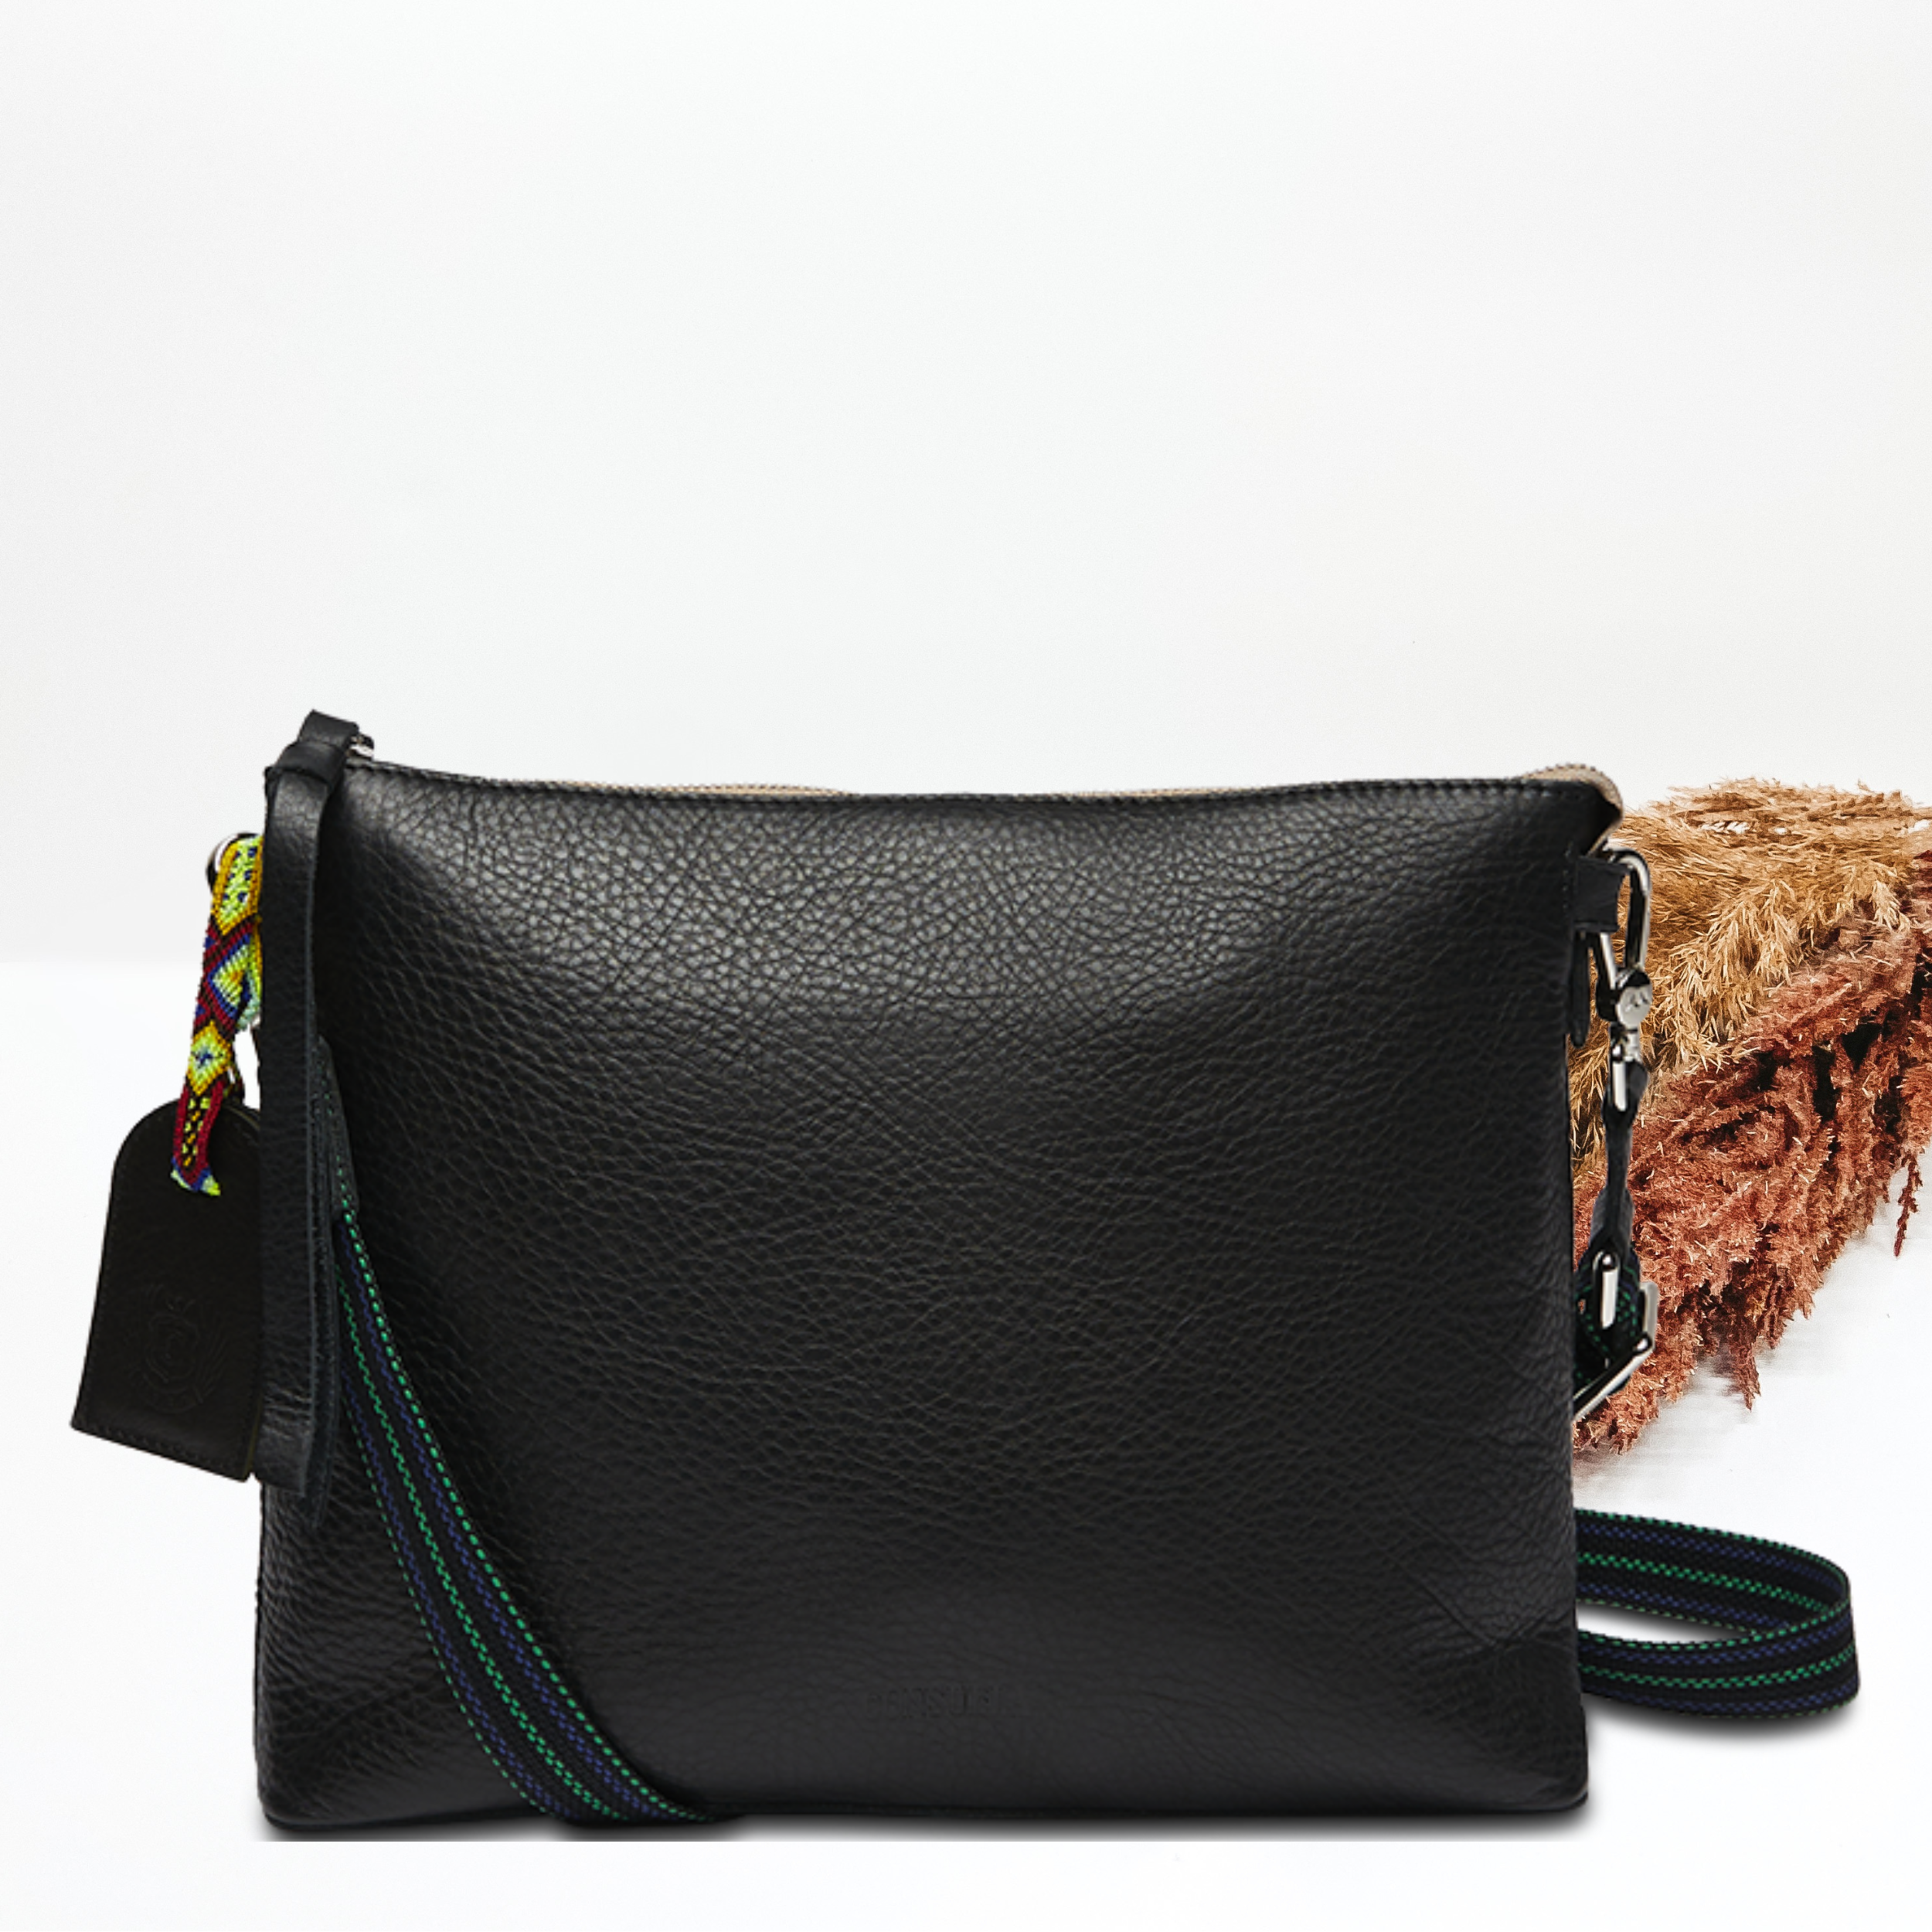 Black, downtown crossbody pictured on a white background. 